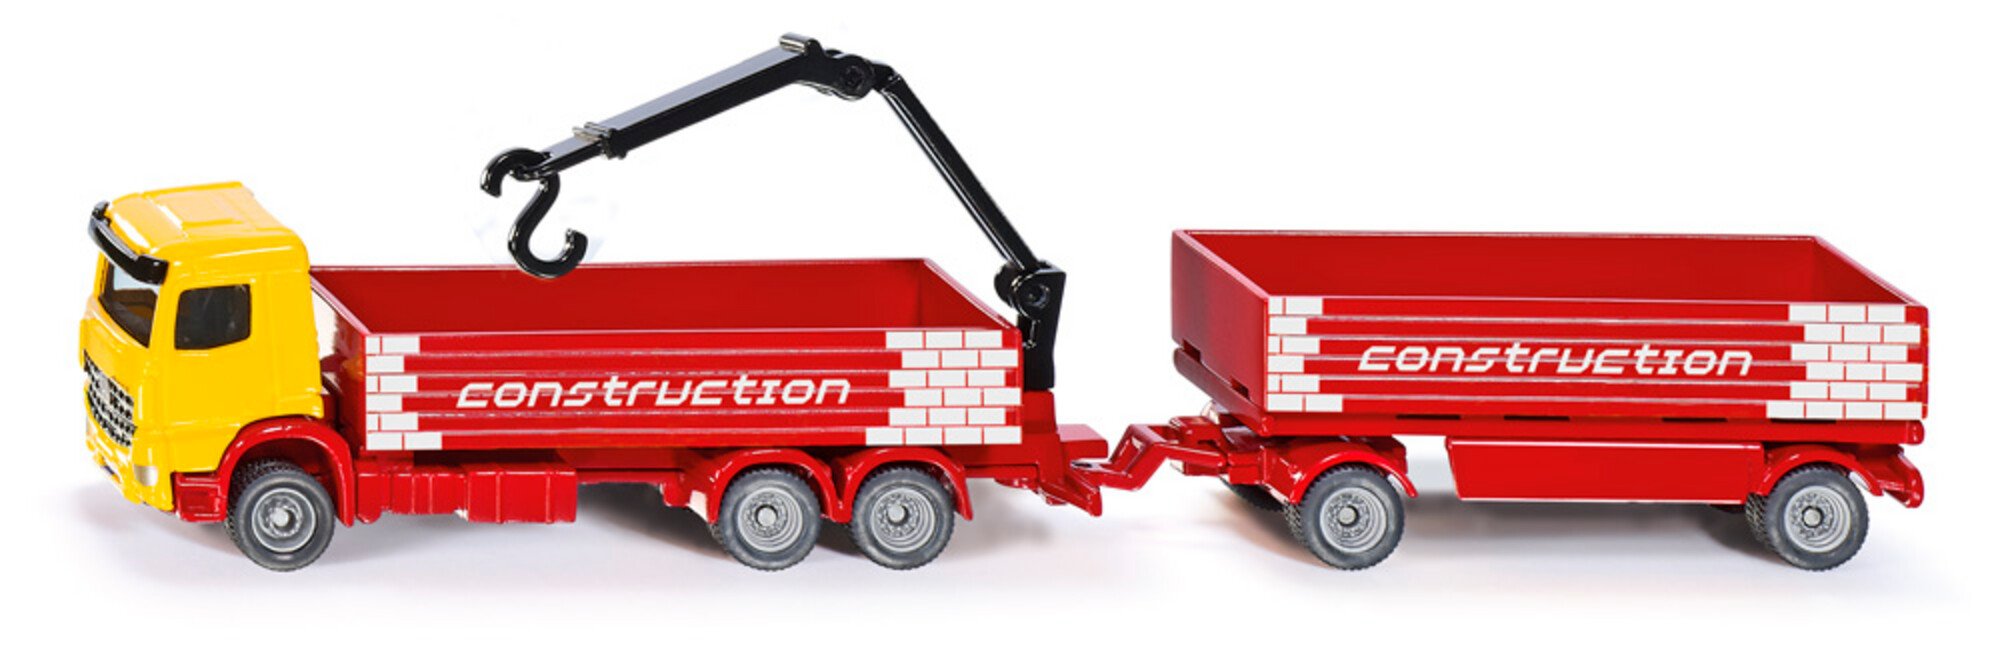 Truck for construction material with trailer